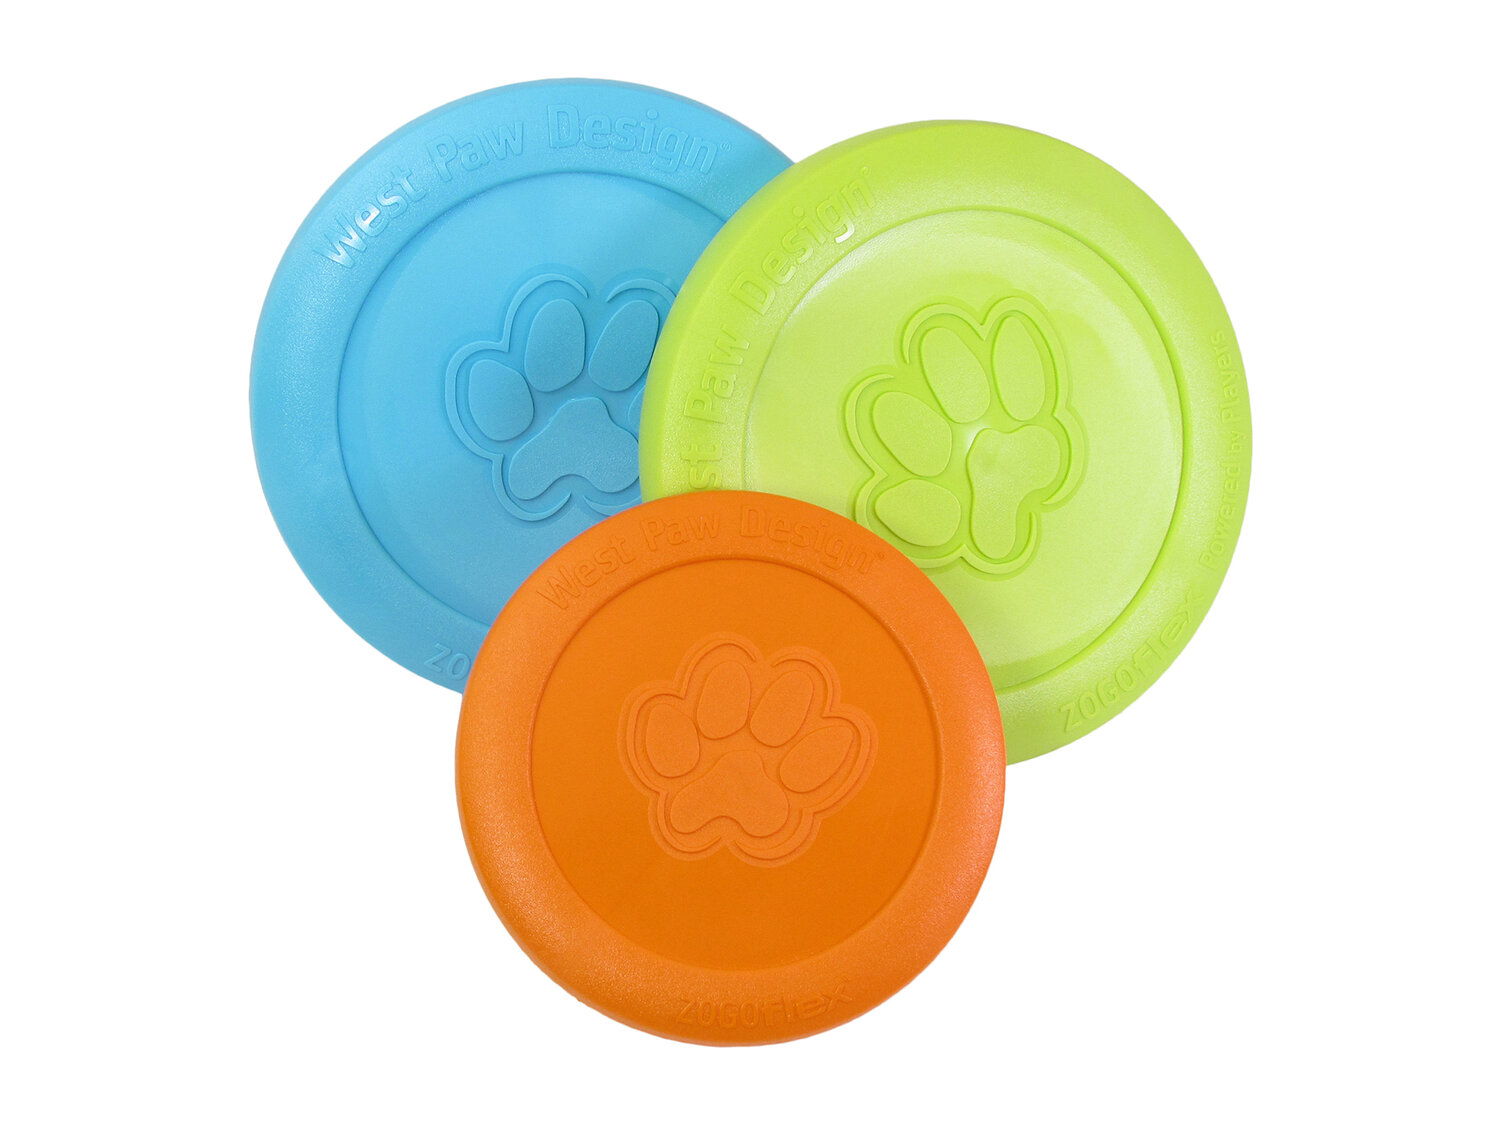 Play – Doubles as Food/Water Bowl West Paw Zogoflex Zisc Dog Frisbee Catch Made in USA High Flying Aerodynamic Disc for Dogs Puppy – Lightweight Tug of War Floatable Dog Frisbees for Fetch 